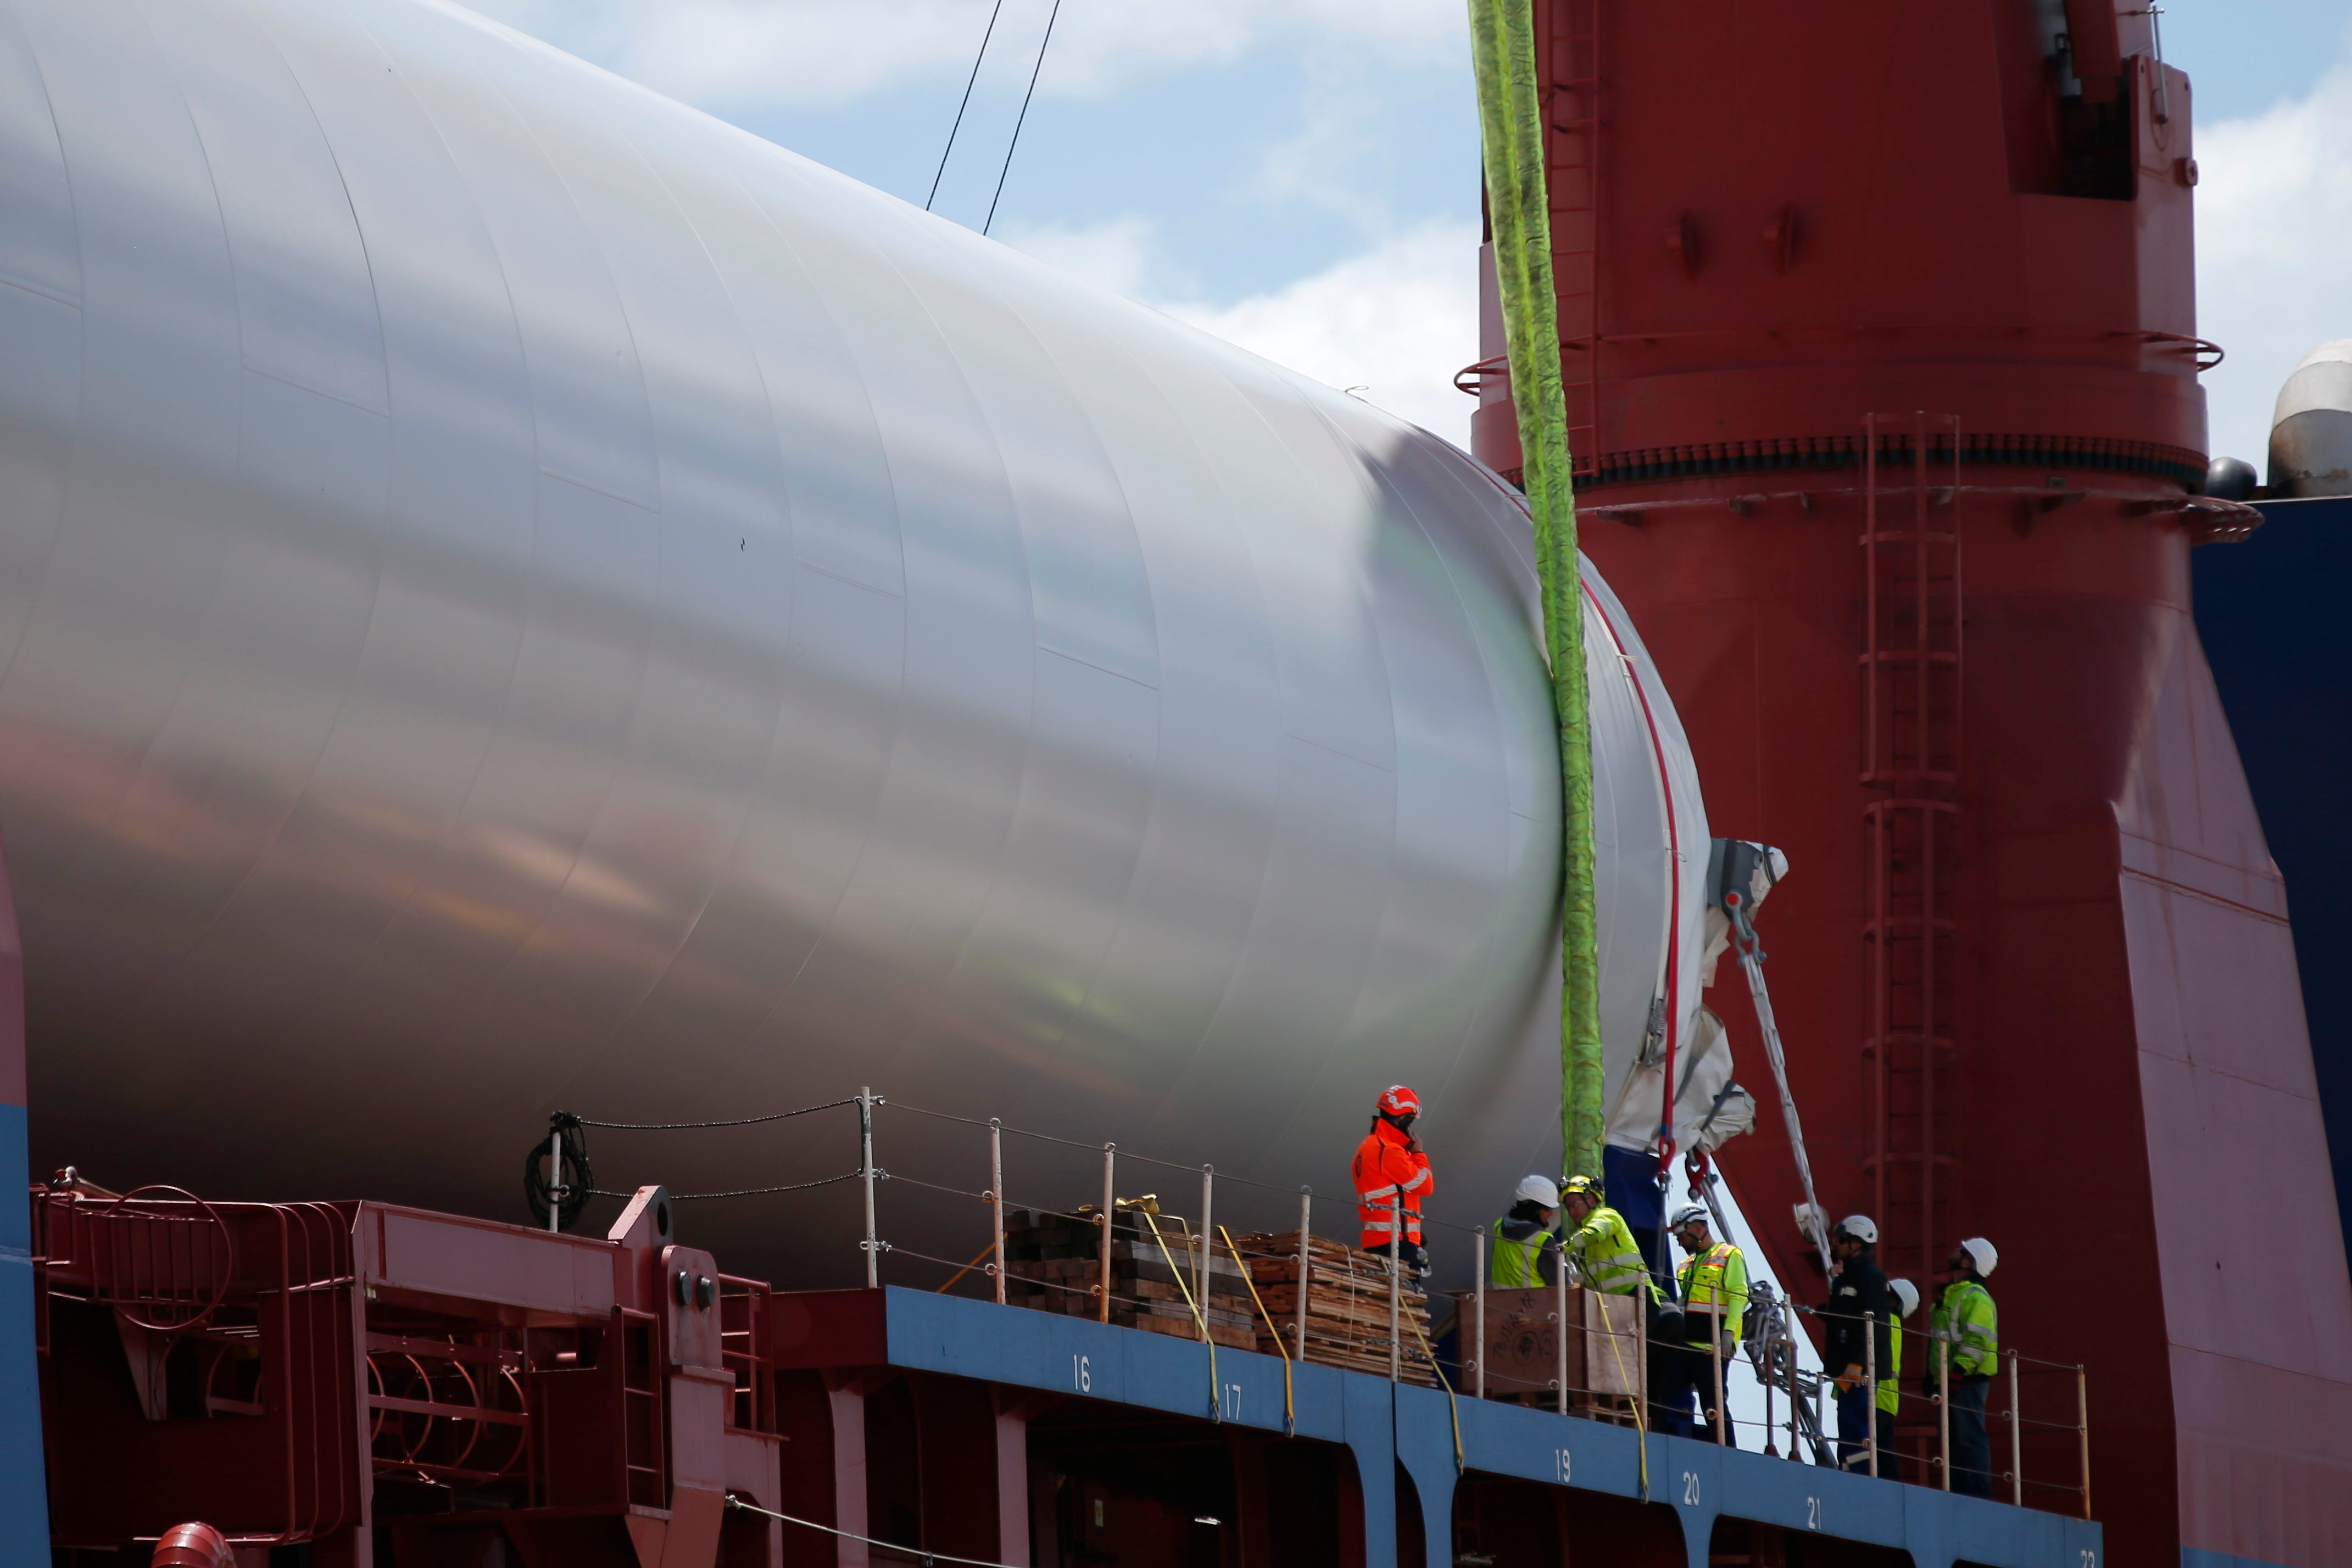 Longshoremen work on attaching straps to one of three sections of the mast of a wind turbine which arrived aboard the first ship carrying turbine components for Vineyard Wind at the Marine Commerce Terminal in New Bedford.